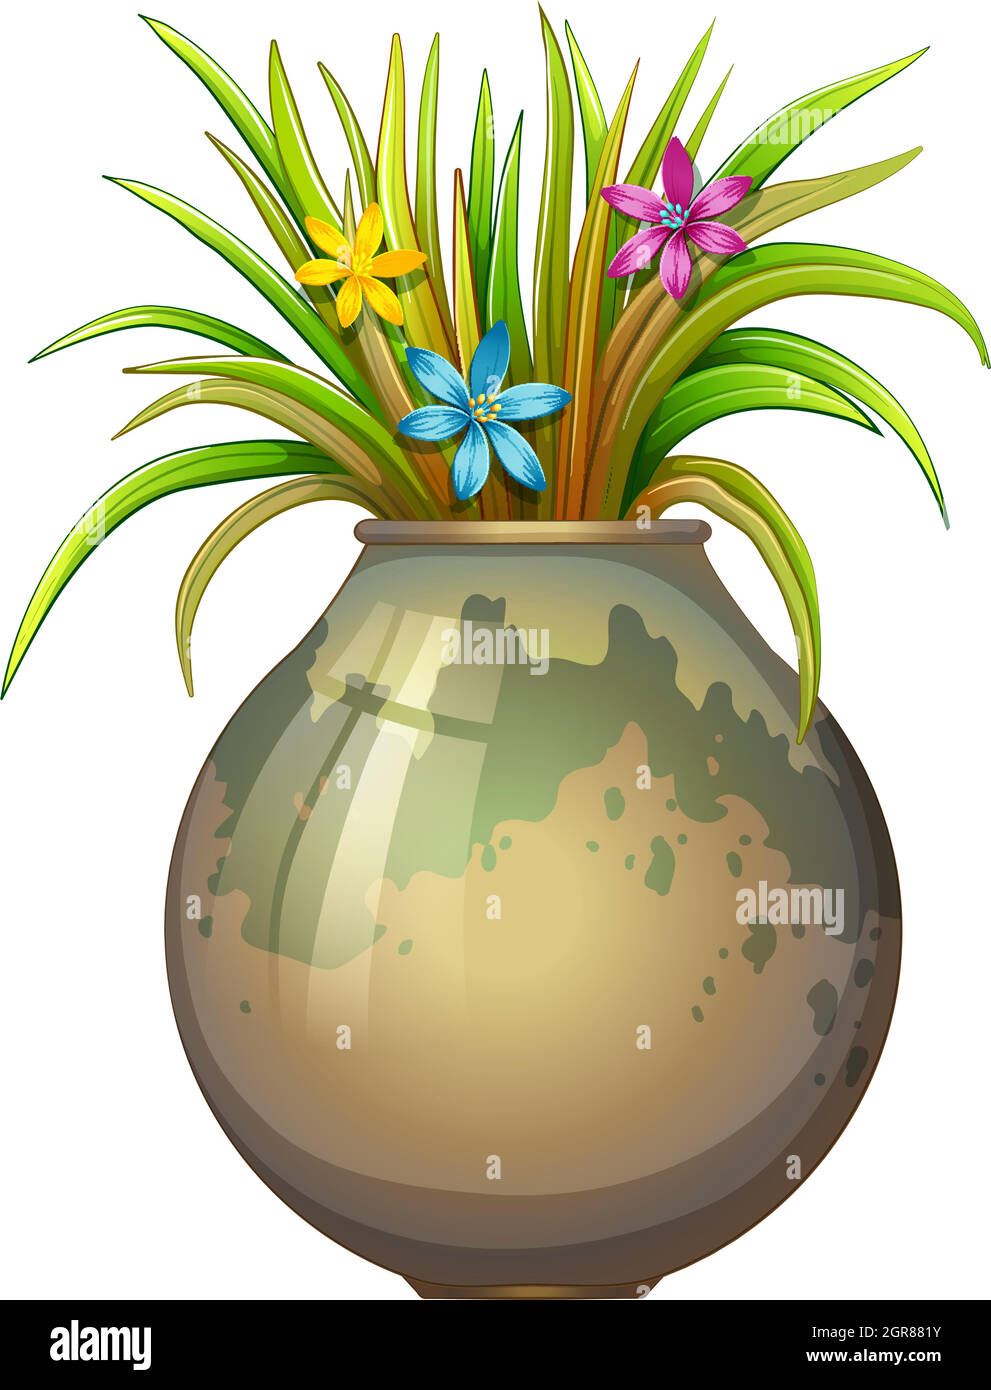 A big flowervase with flowering plants Stock Vector